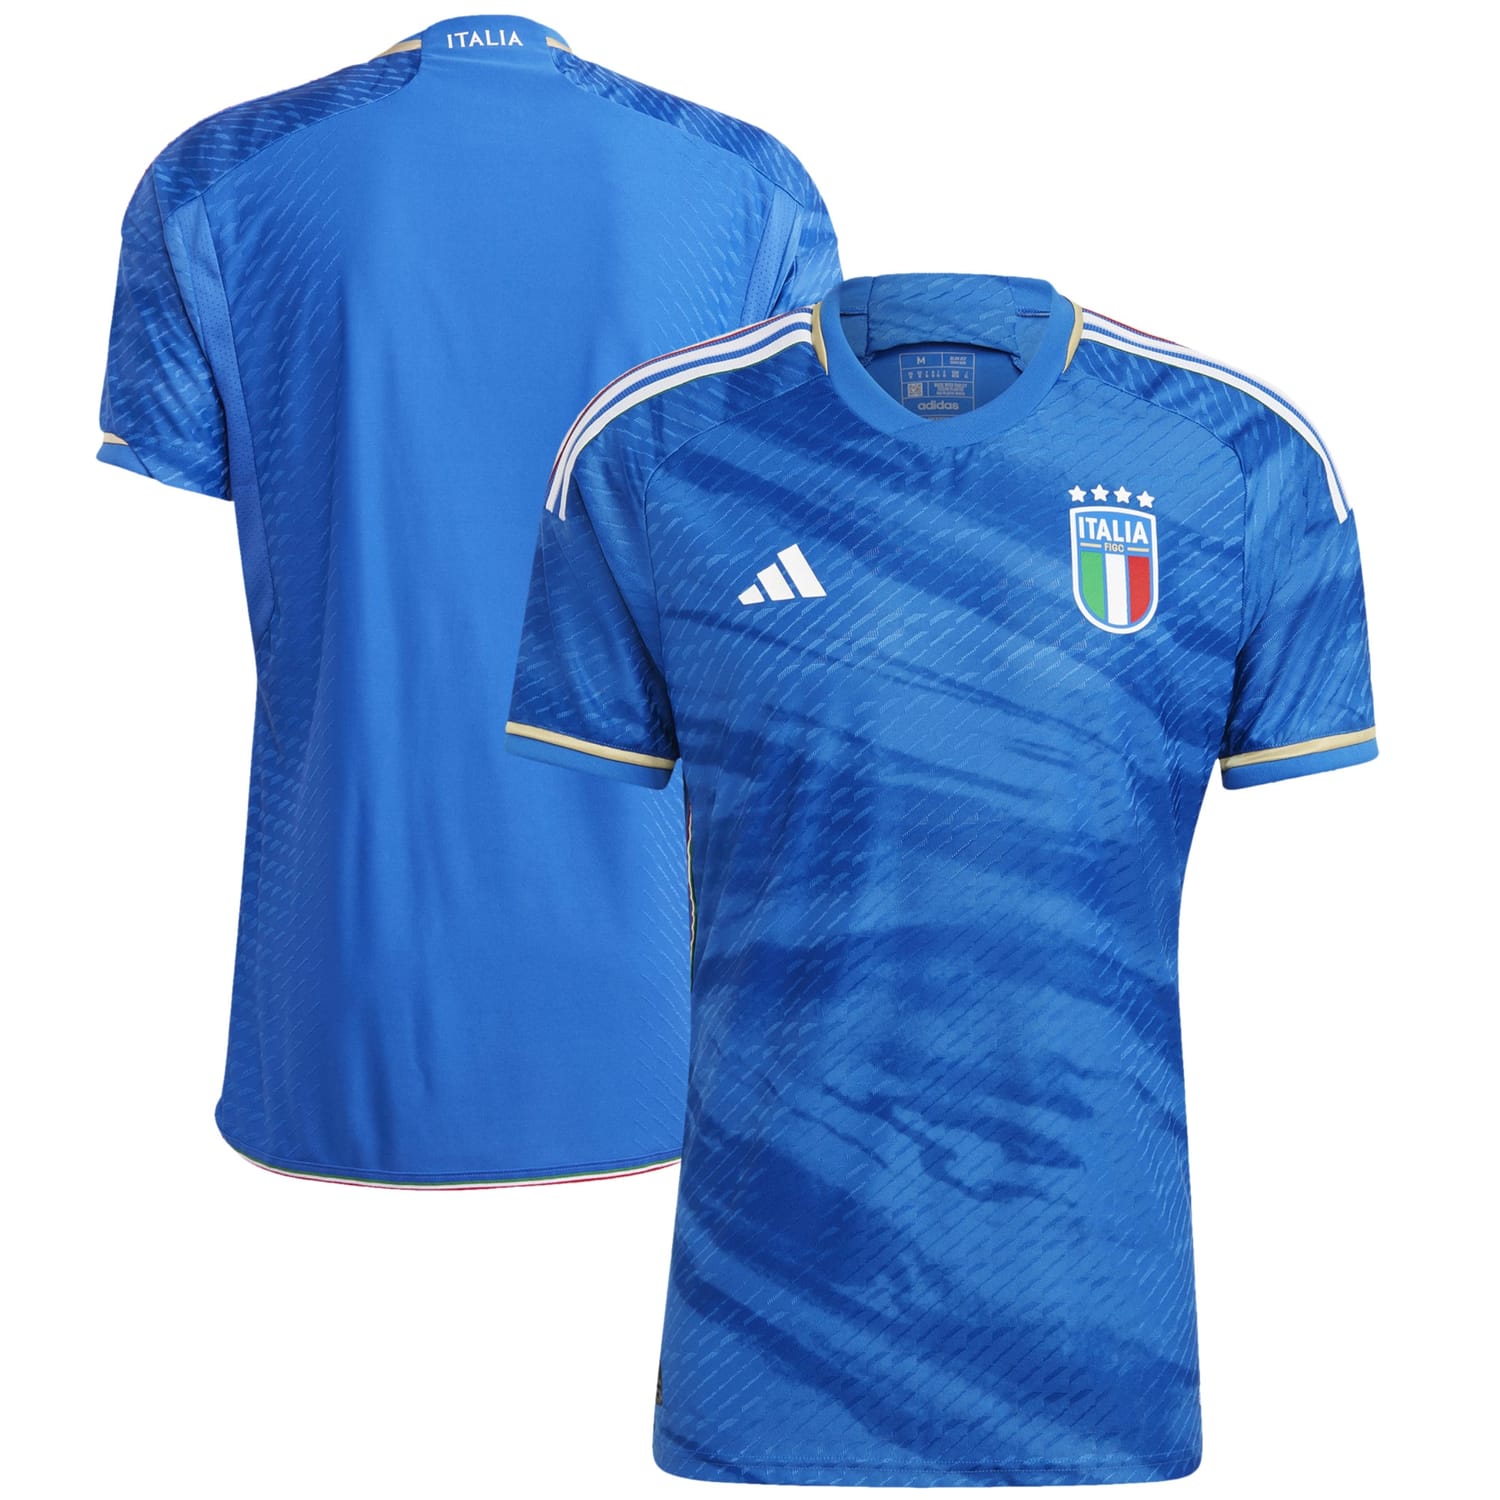 Italy National Team Home Authentic Jersey Shirt for Men